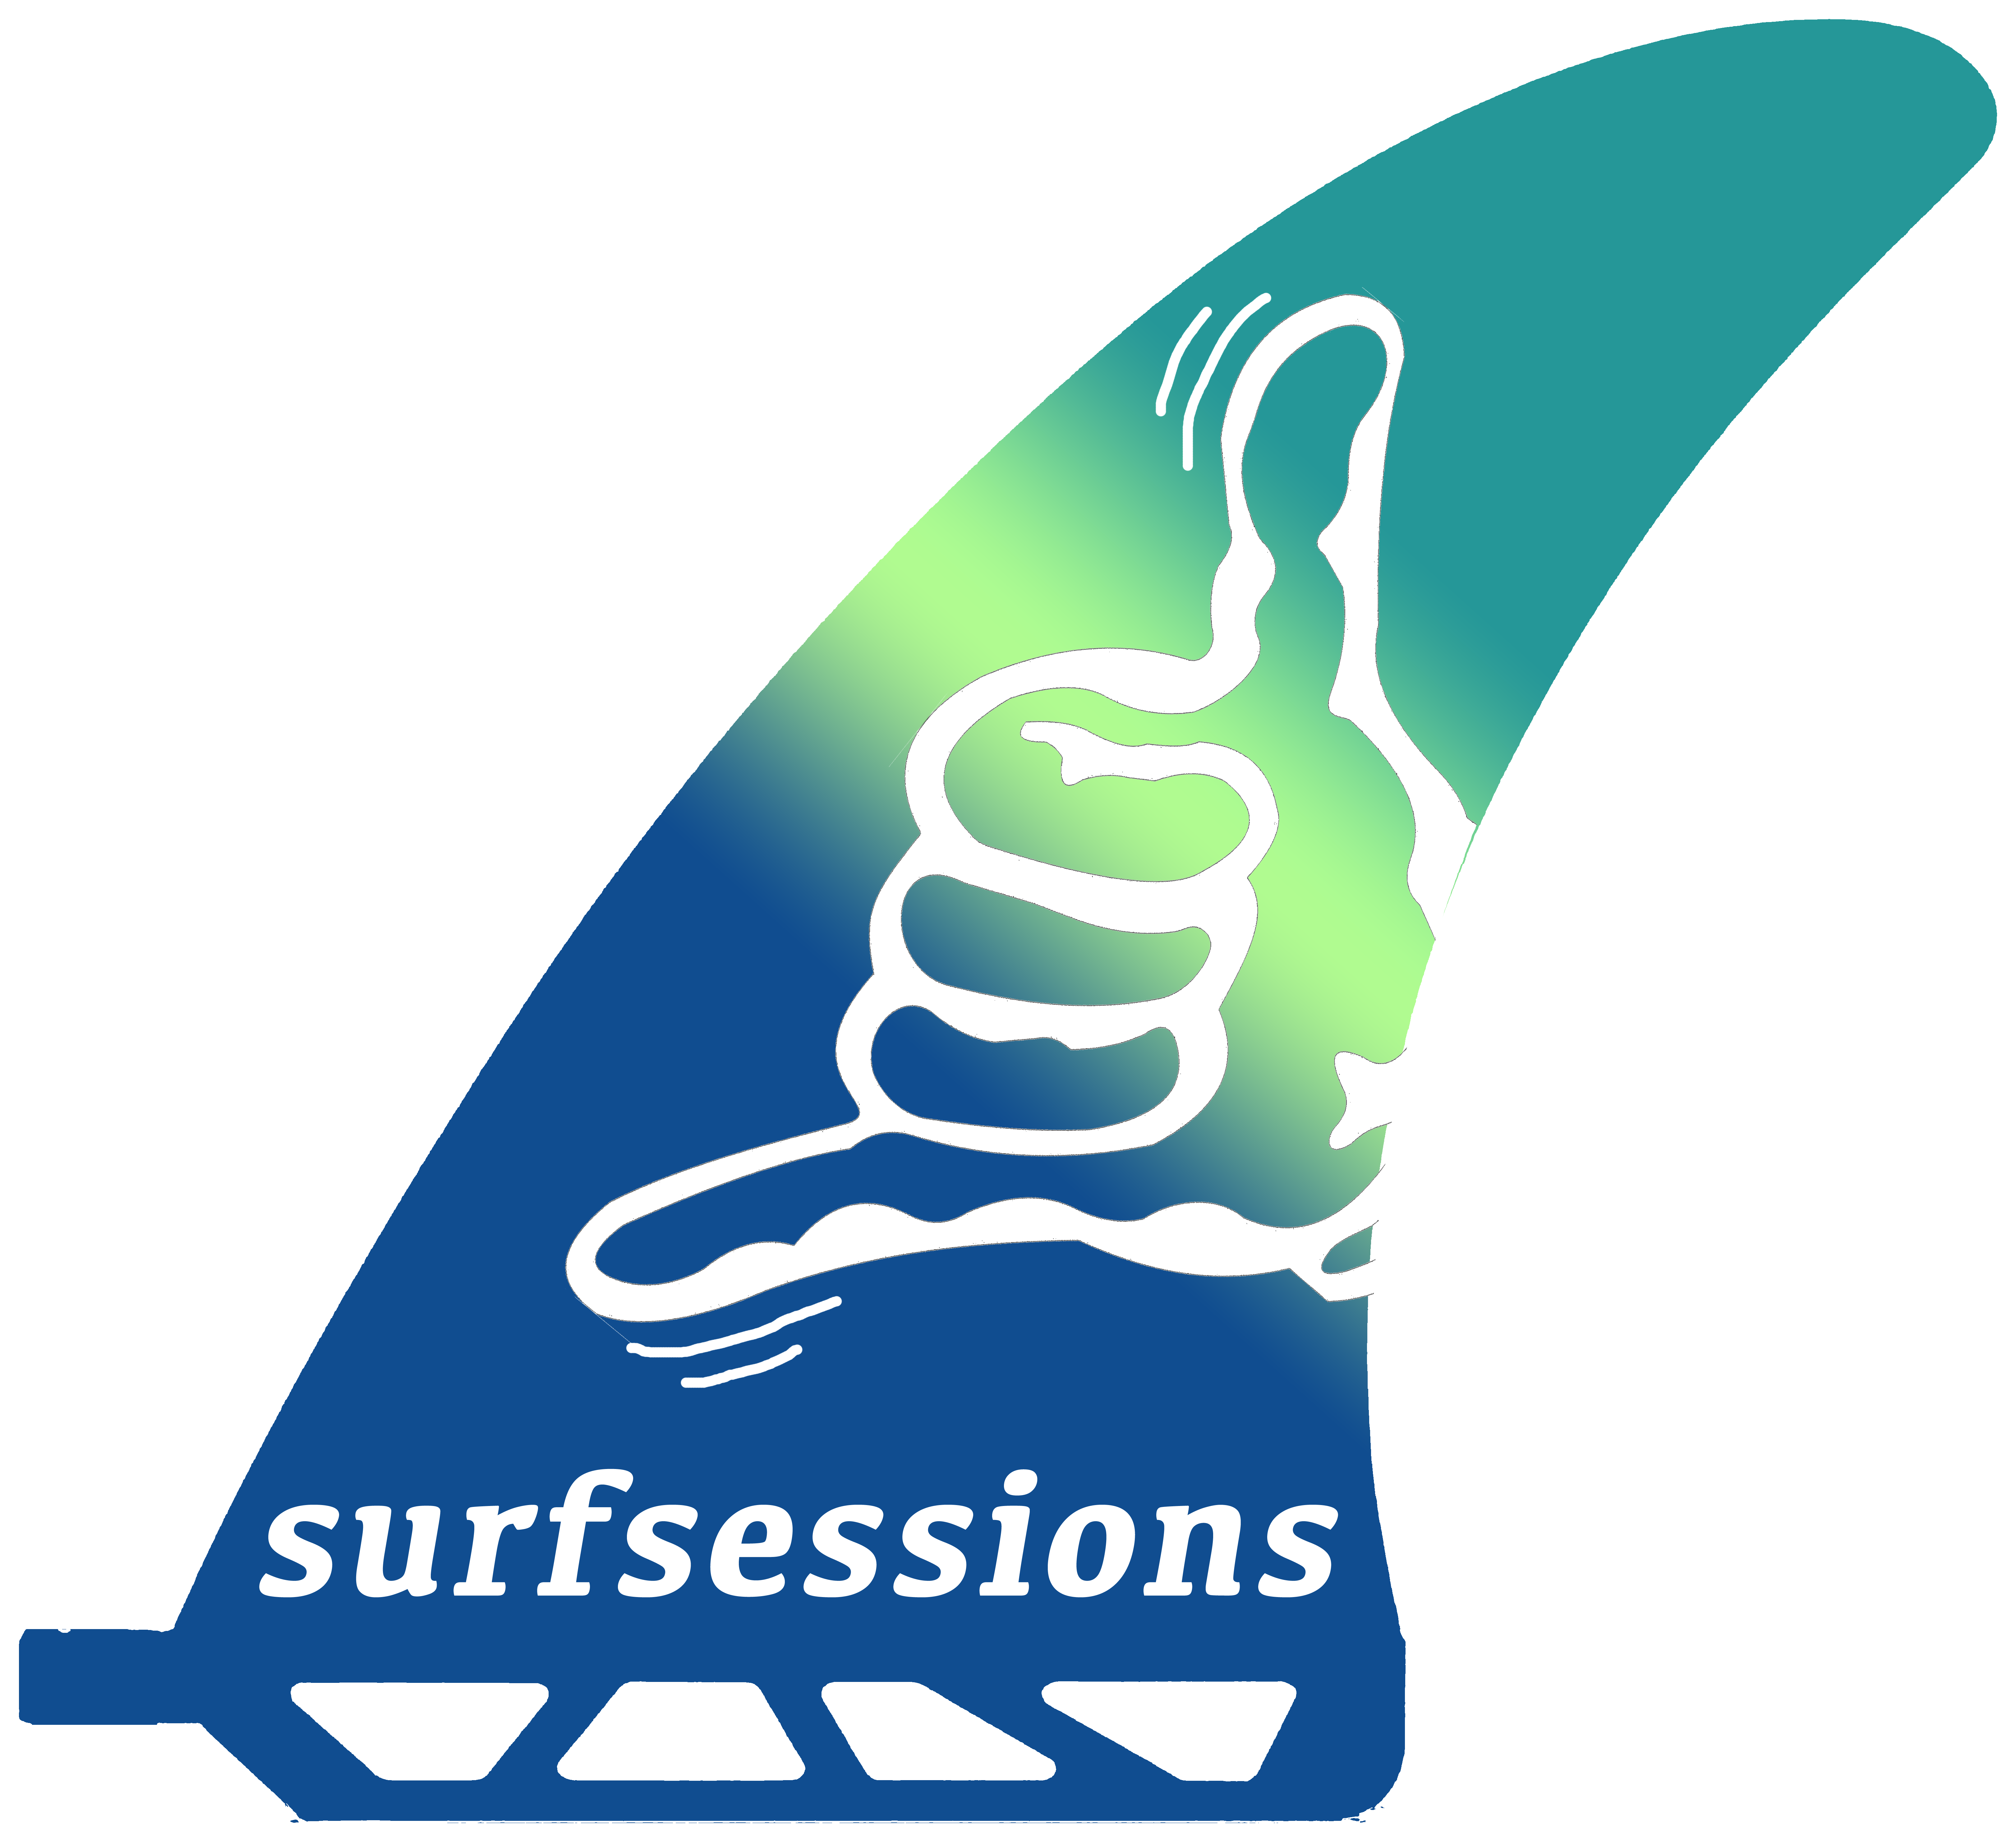 Surfsessions.org